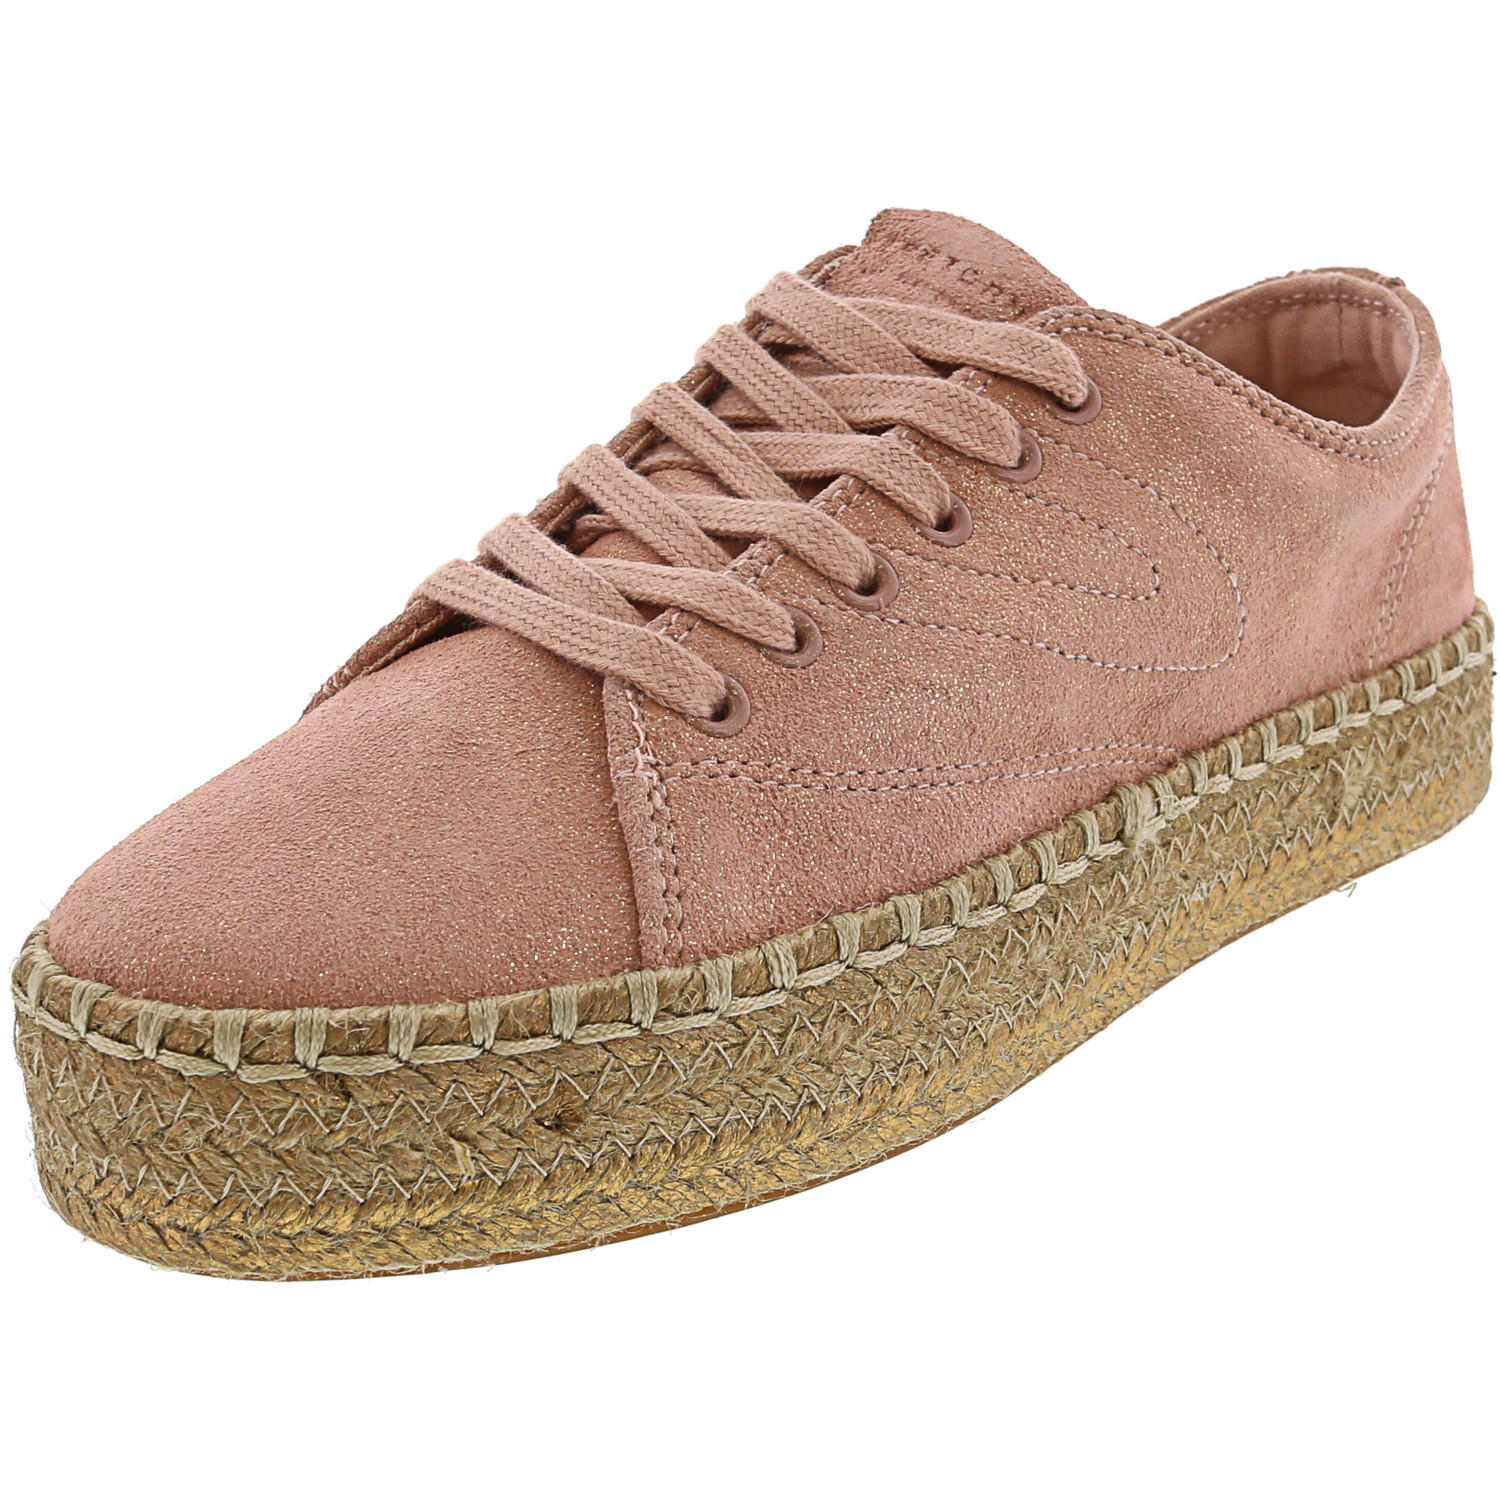 Tretorn Women's Eve 2 Suede Soft Blush / Gold Ankle-High Sneaker - 4M ...